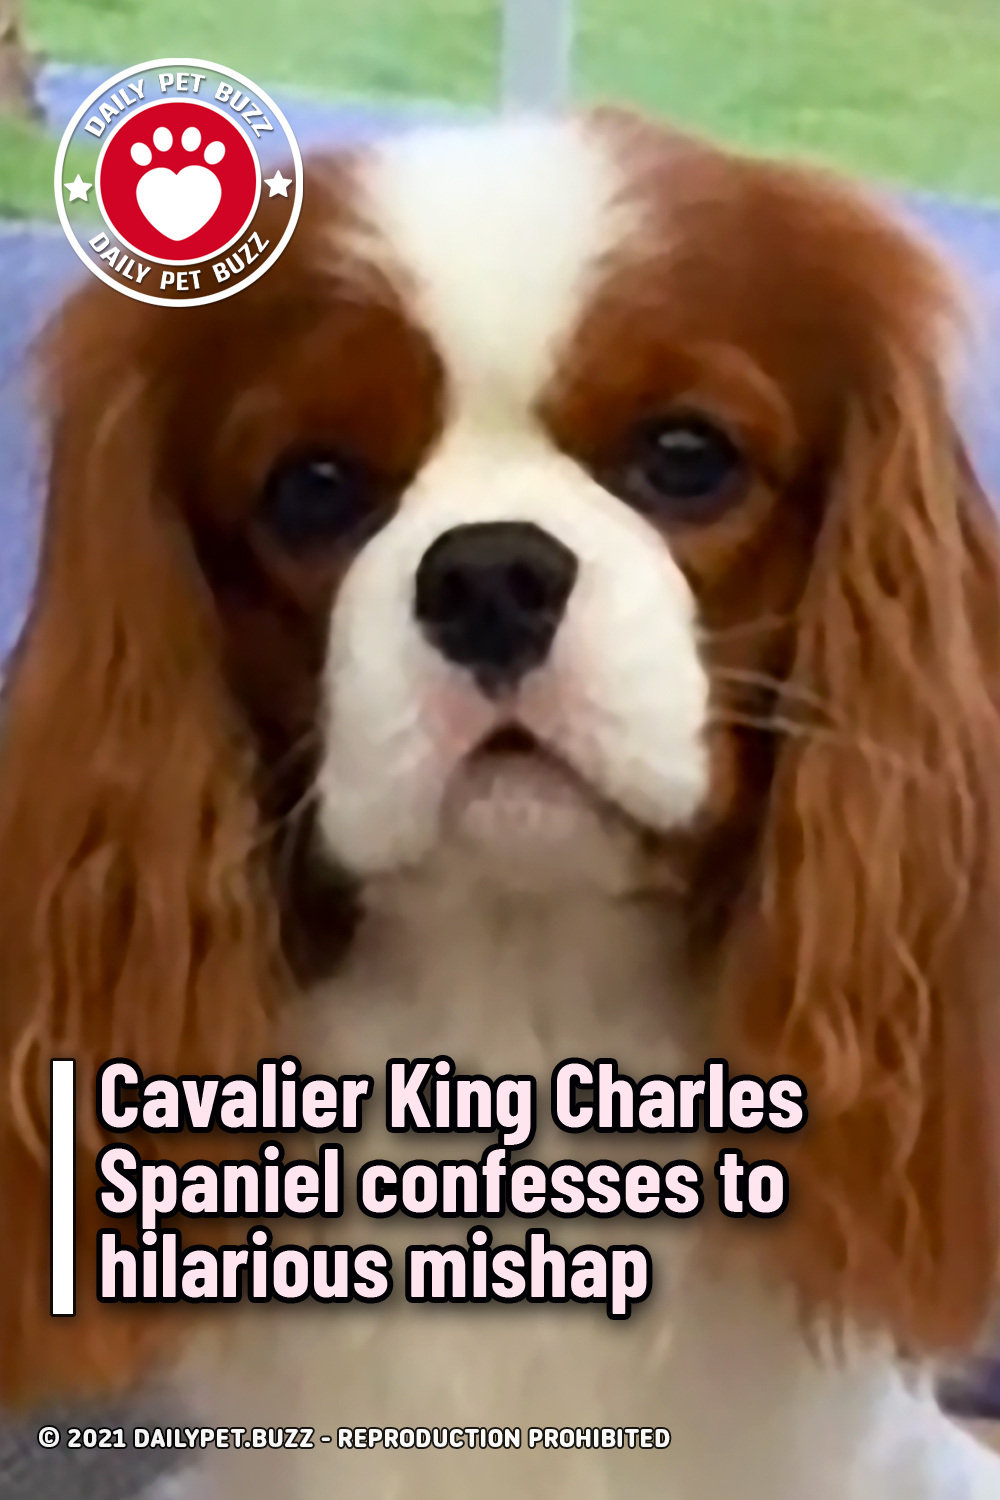 Cavalier King Charles Spaniel confesses to hilarious mishap